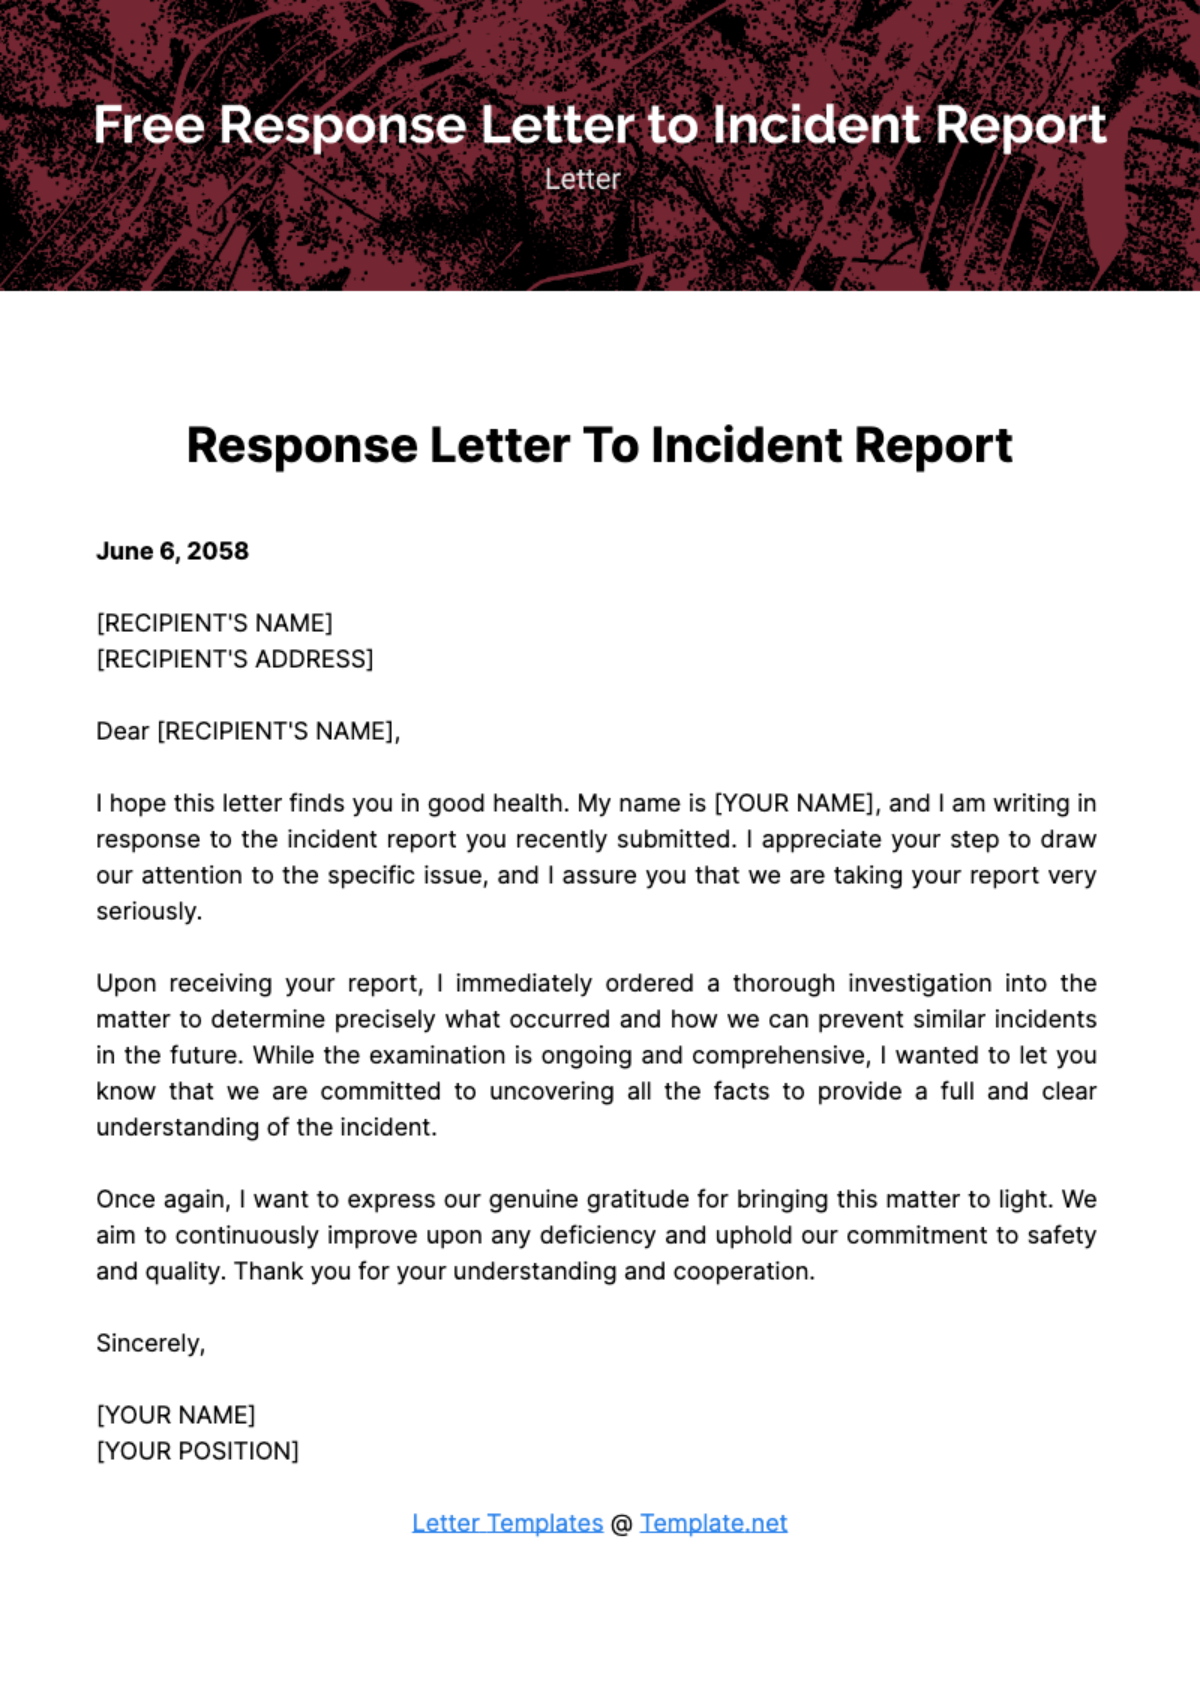 Free Response Letter to Incident Report Template